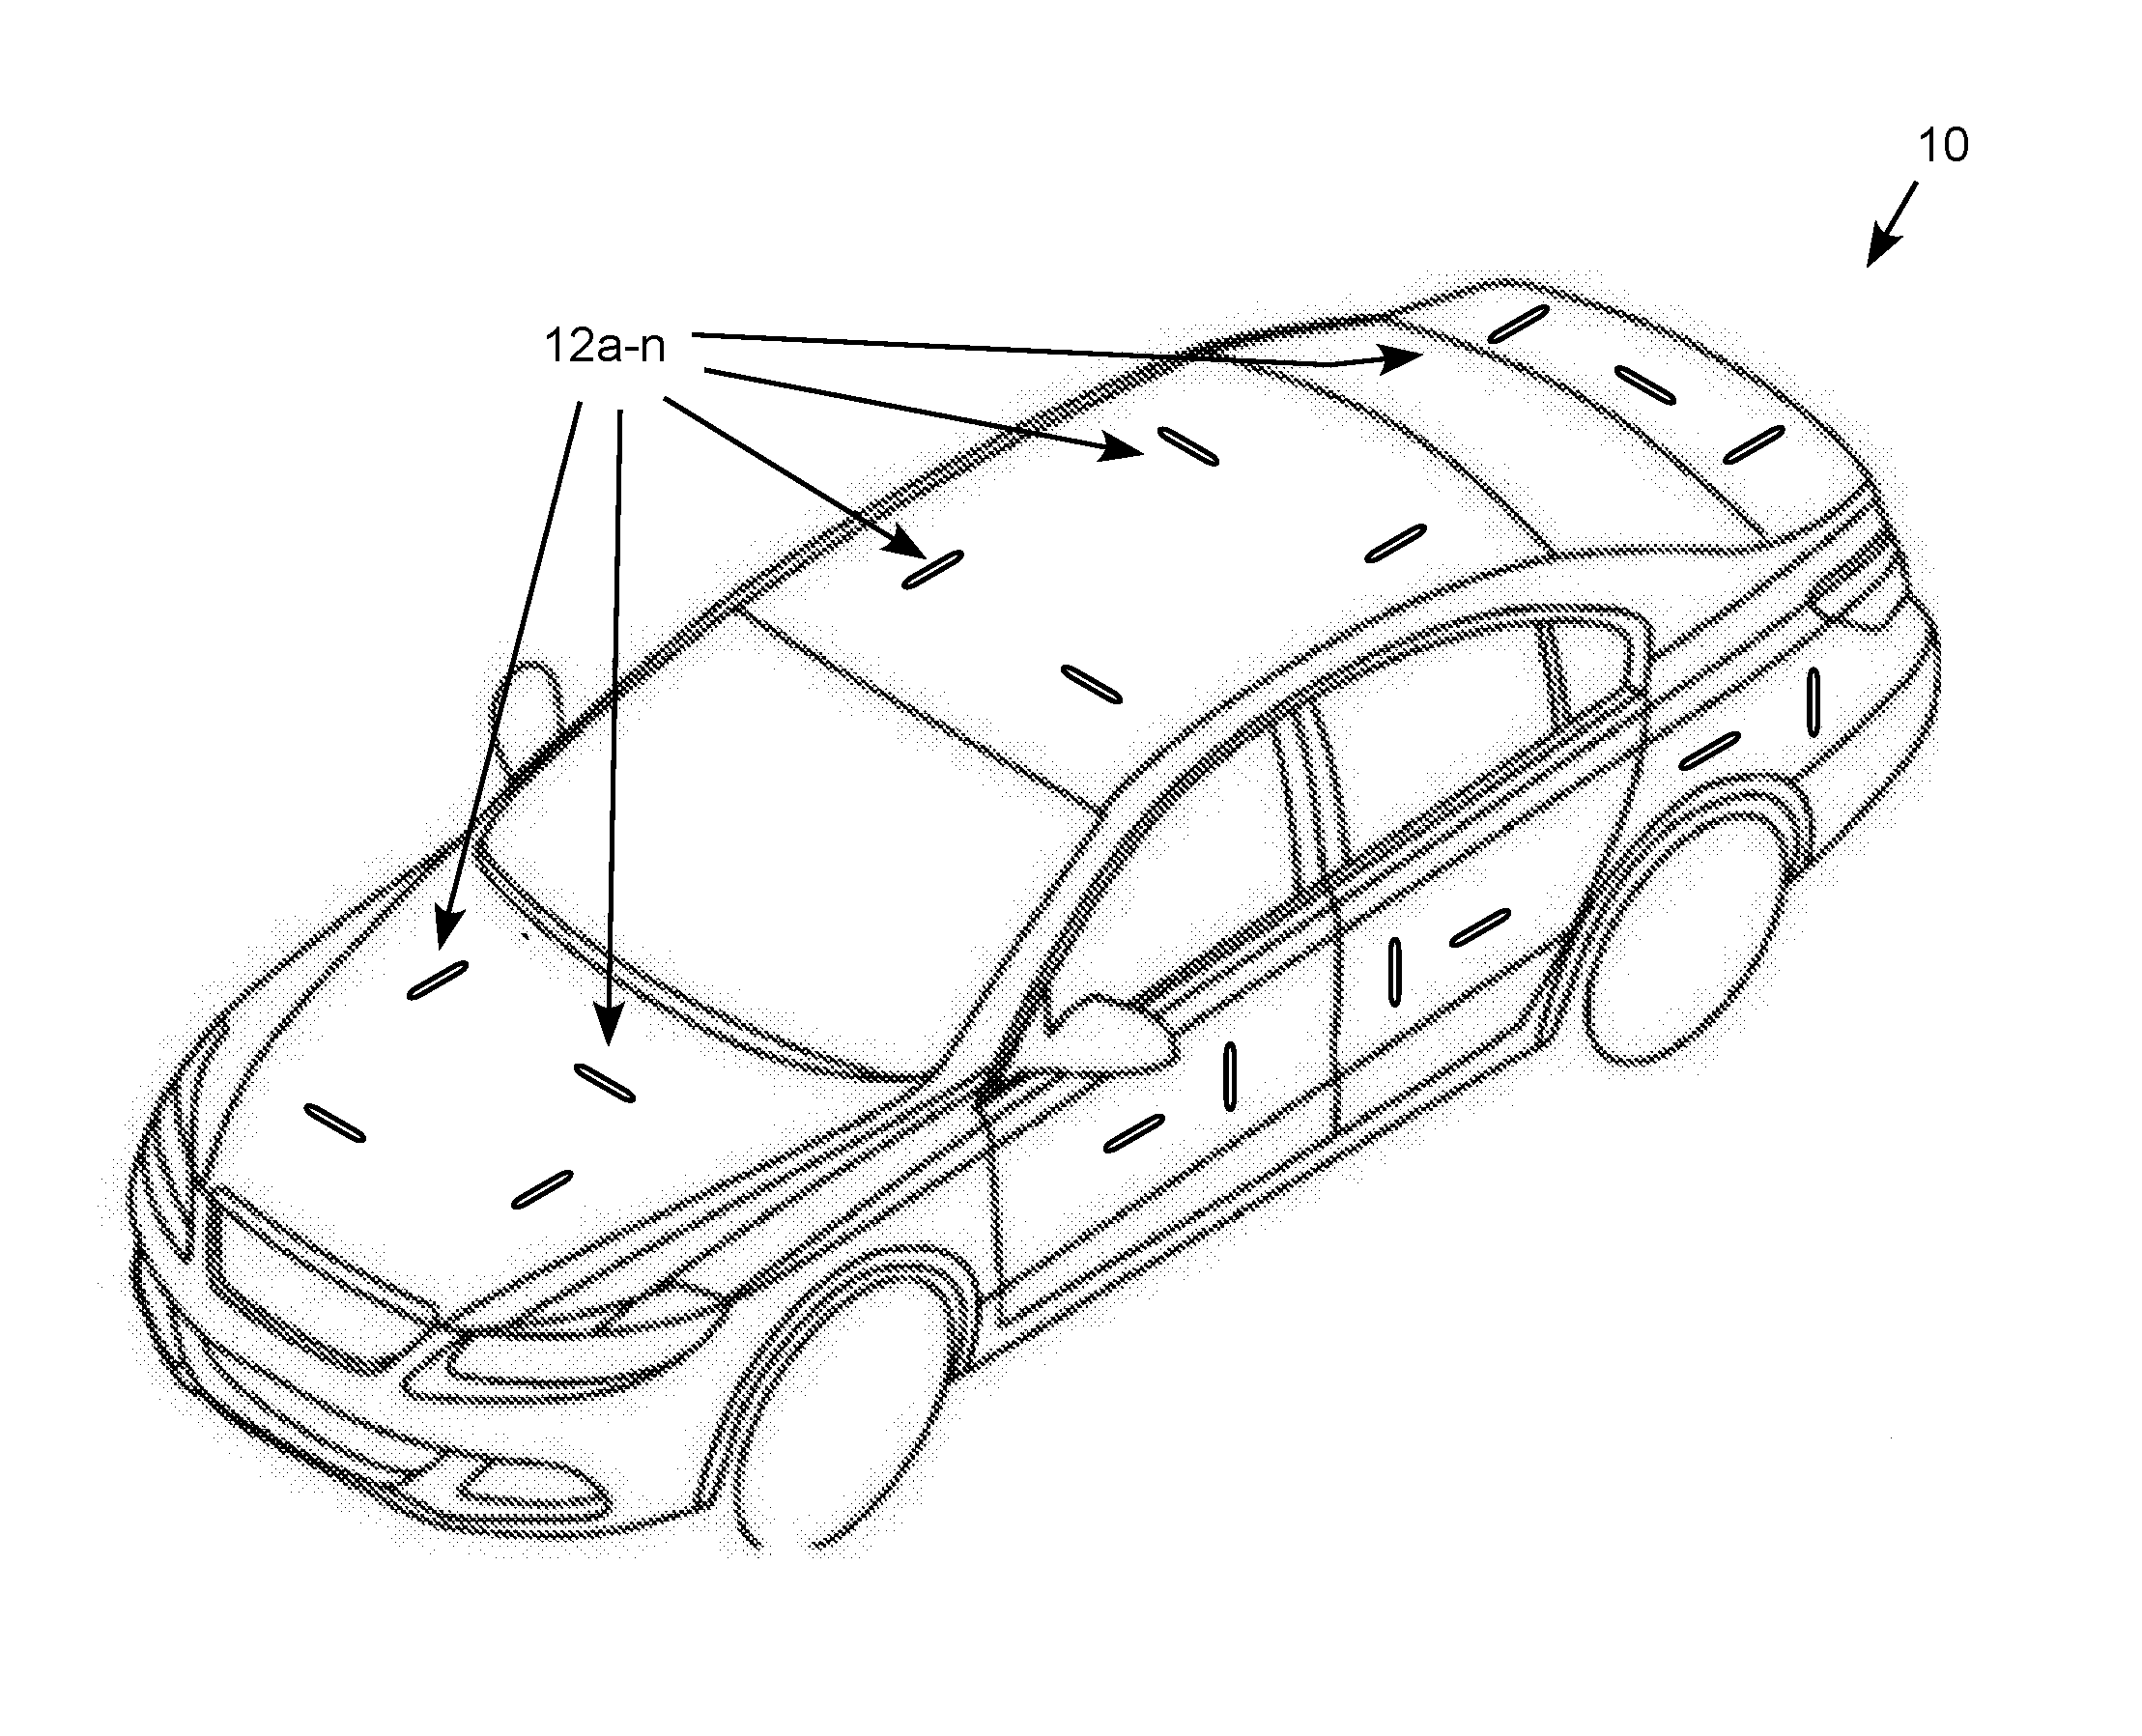 Slot antenna built into a vehicle body panel